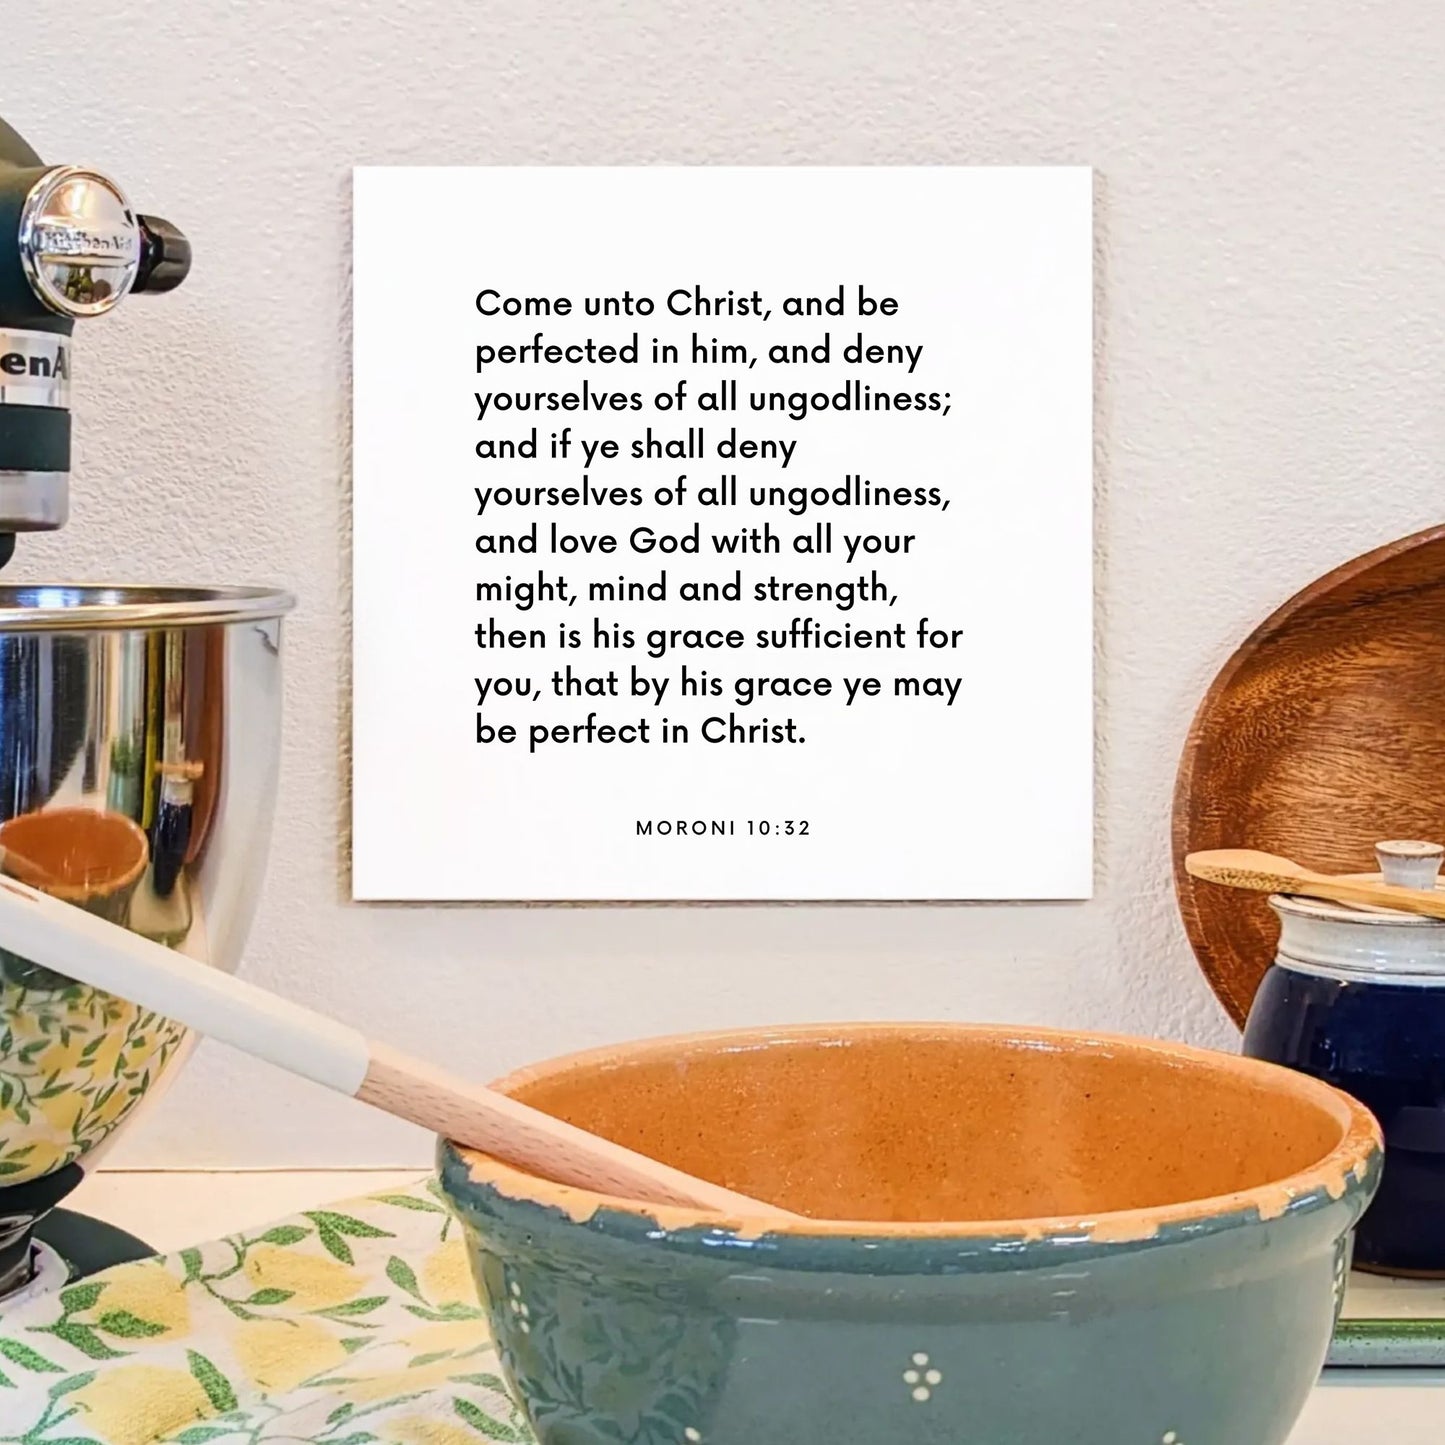 Kitchen mouting of the scripture tile for Moroni 10:32 - "Come unto Christ, and be perfected in him"